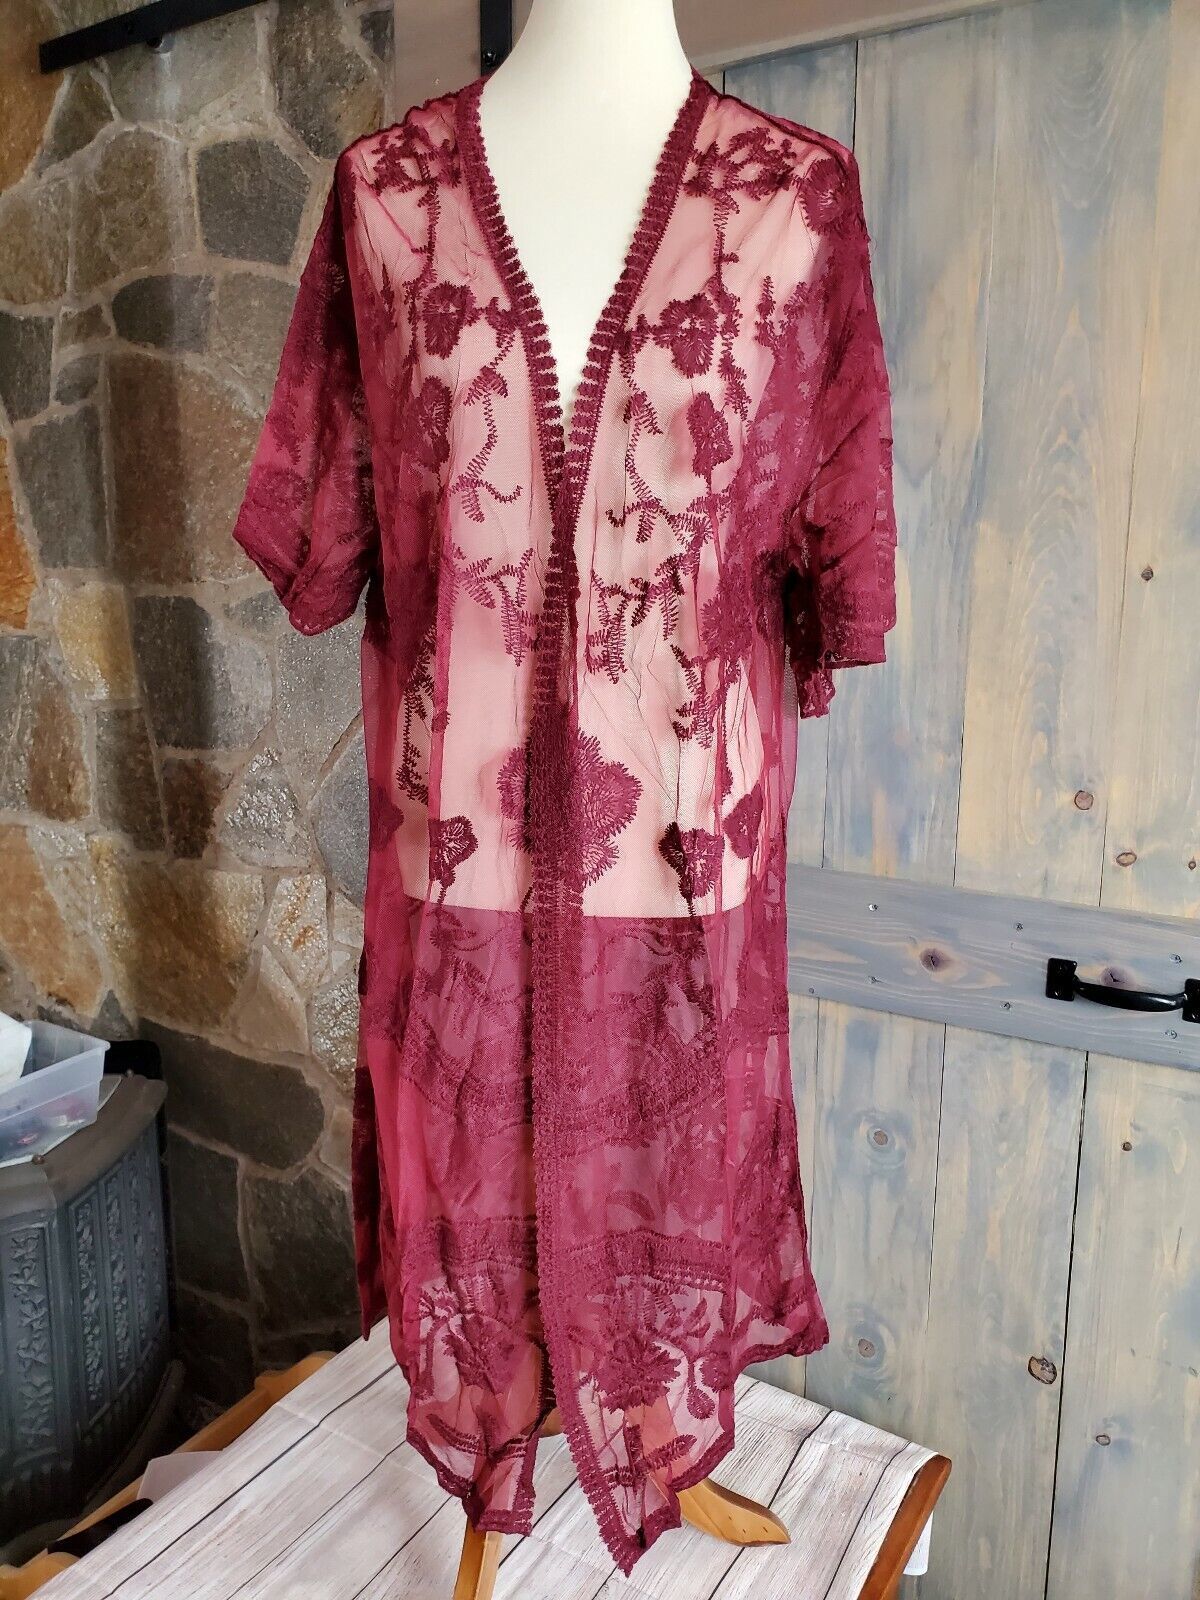 Primary image for rue21 Rue 21 Nightgown Maroon Lace Open Front Gown Robe Size L